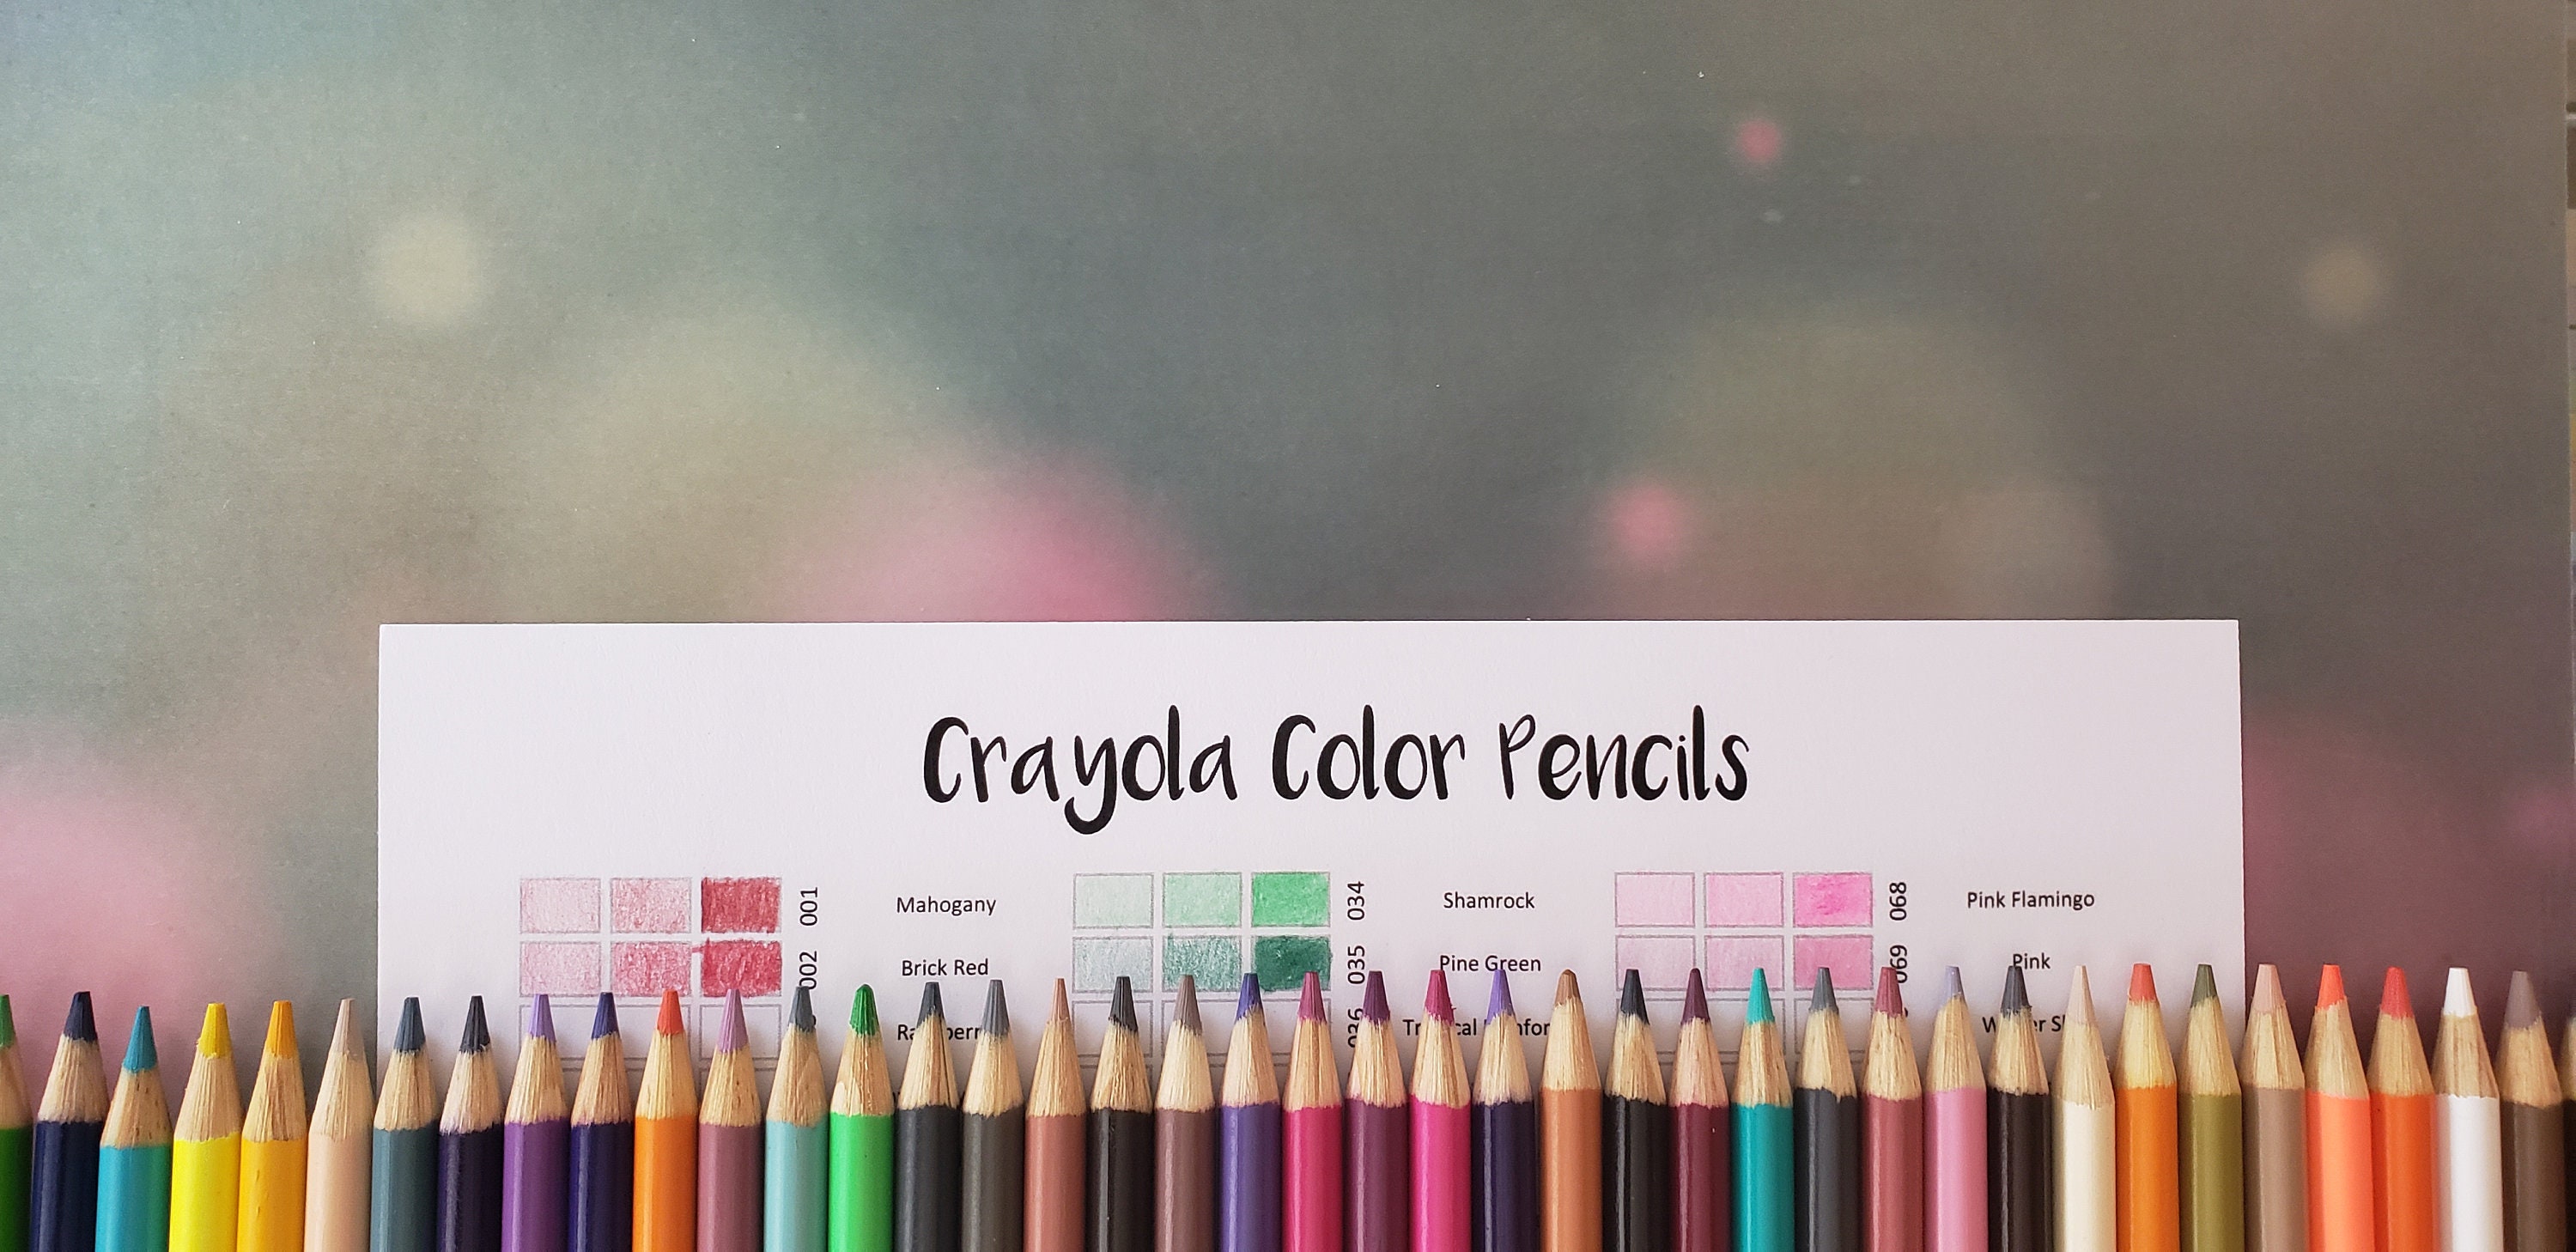 Soucolor 72 Colored Pencils Color Chart Swatch Prefilled W/ Numbers Artist  Reference Printable Adult Coloring Resource PDF 2 Pages 